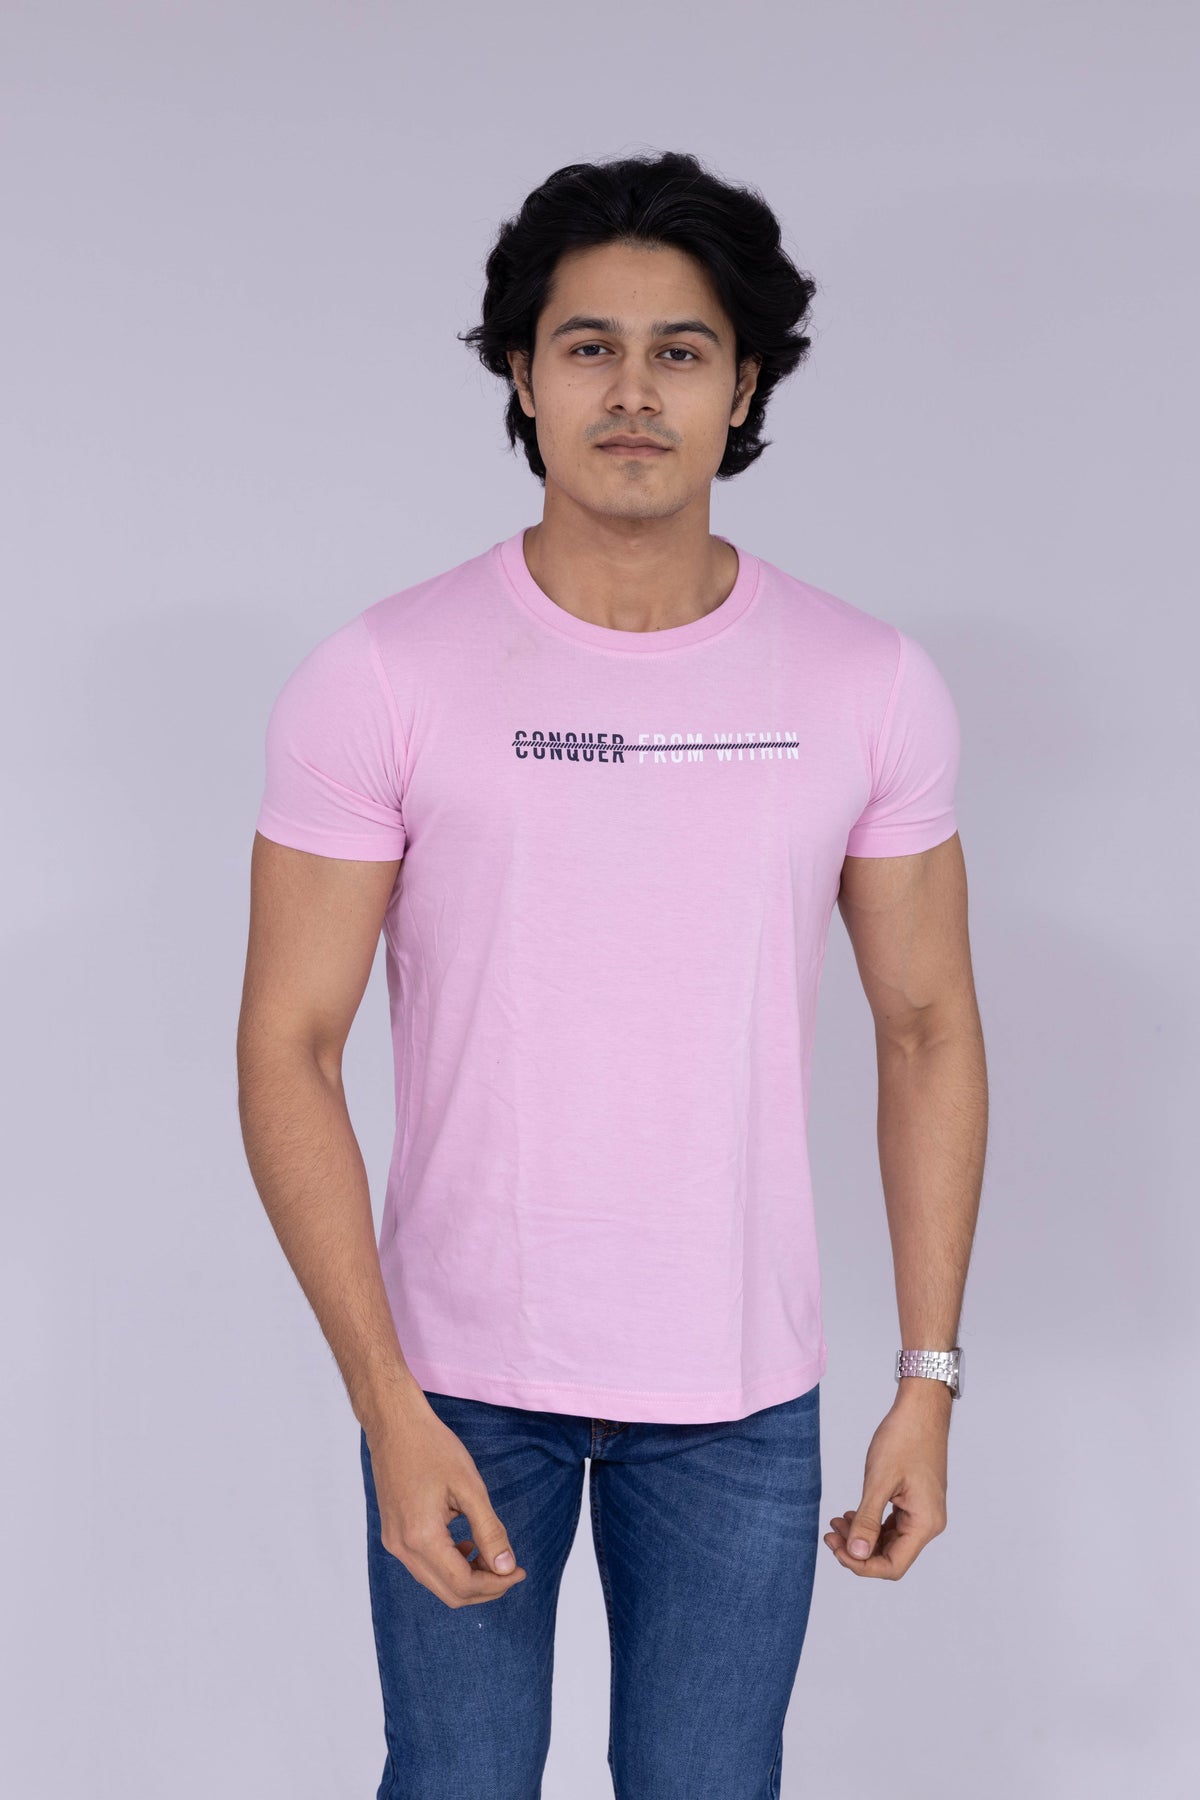 Conquer from within light pink T-shirt